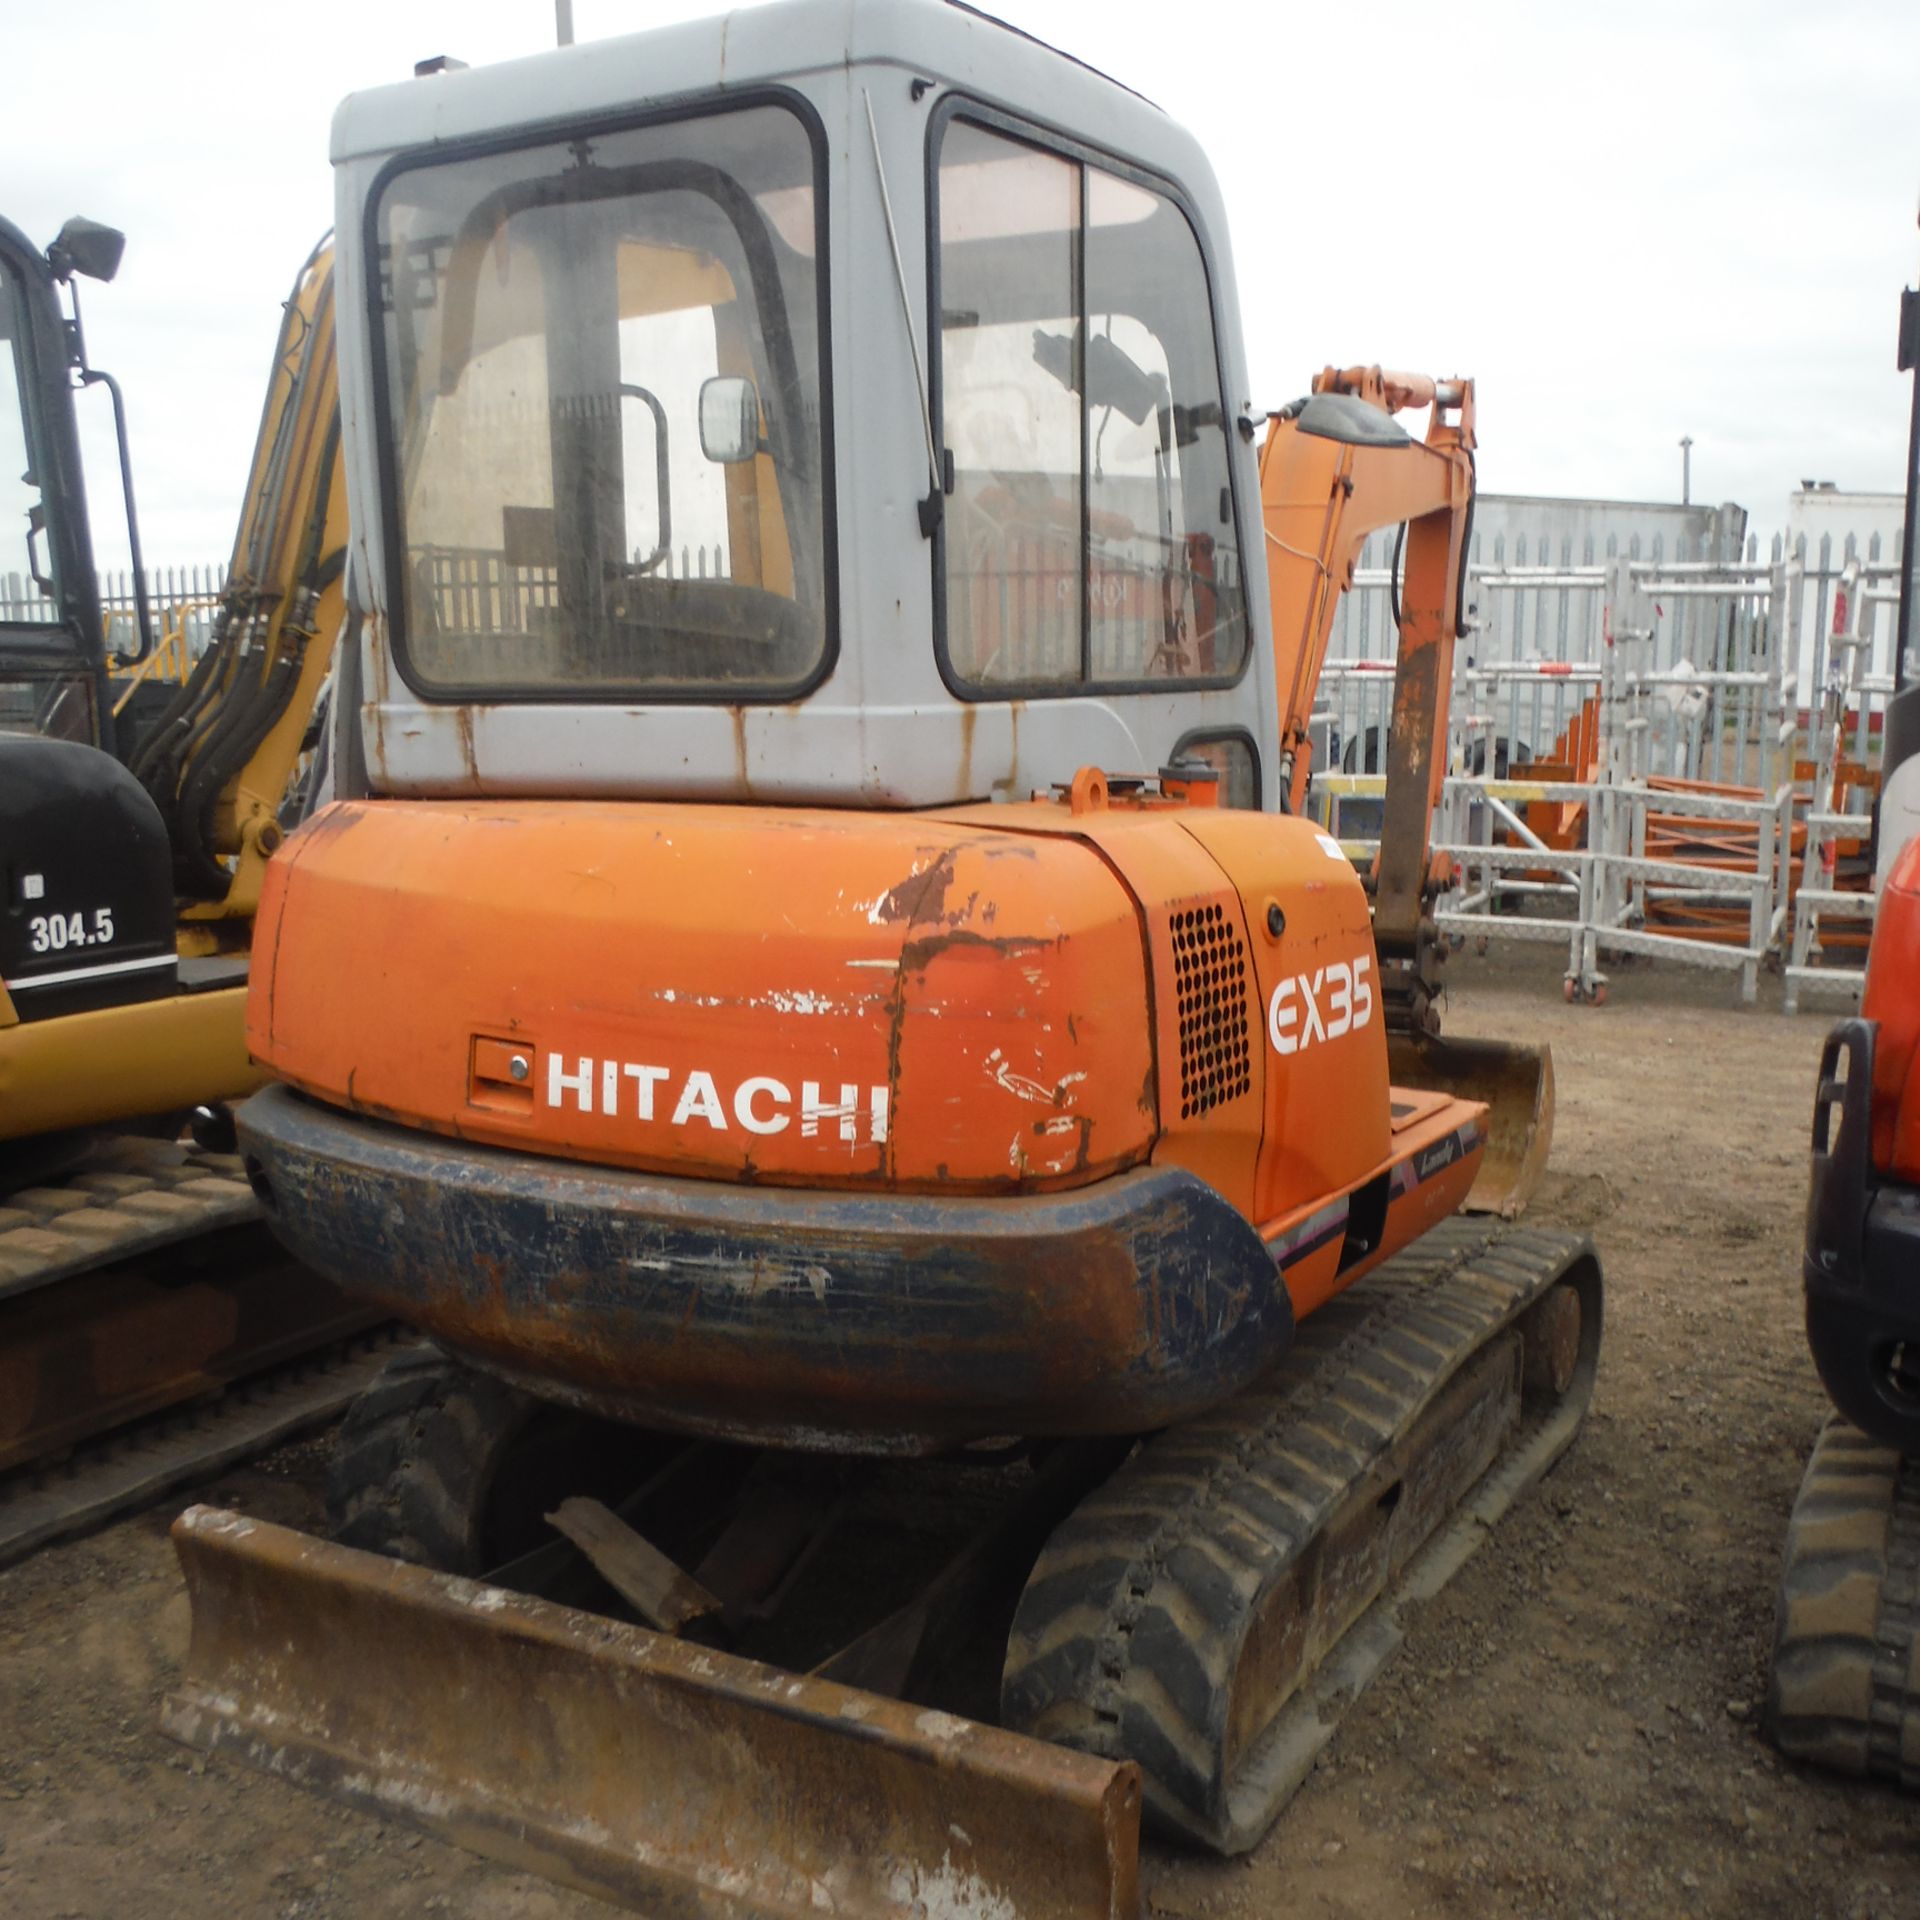 HITACHI EX35 rubber tracked excavator with bucket, blade & piped - Image 2 of 2